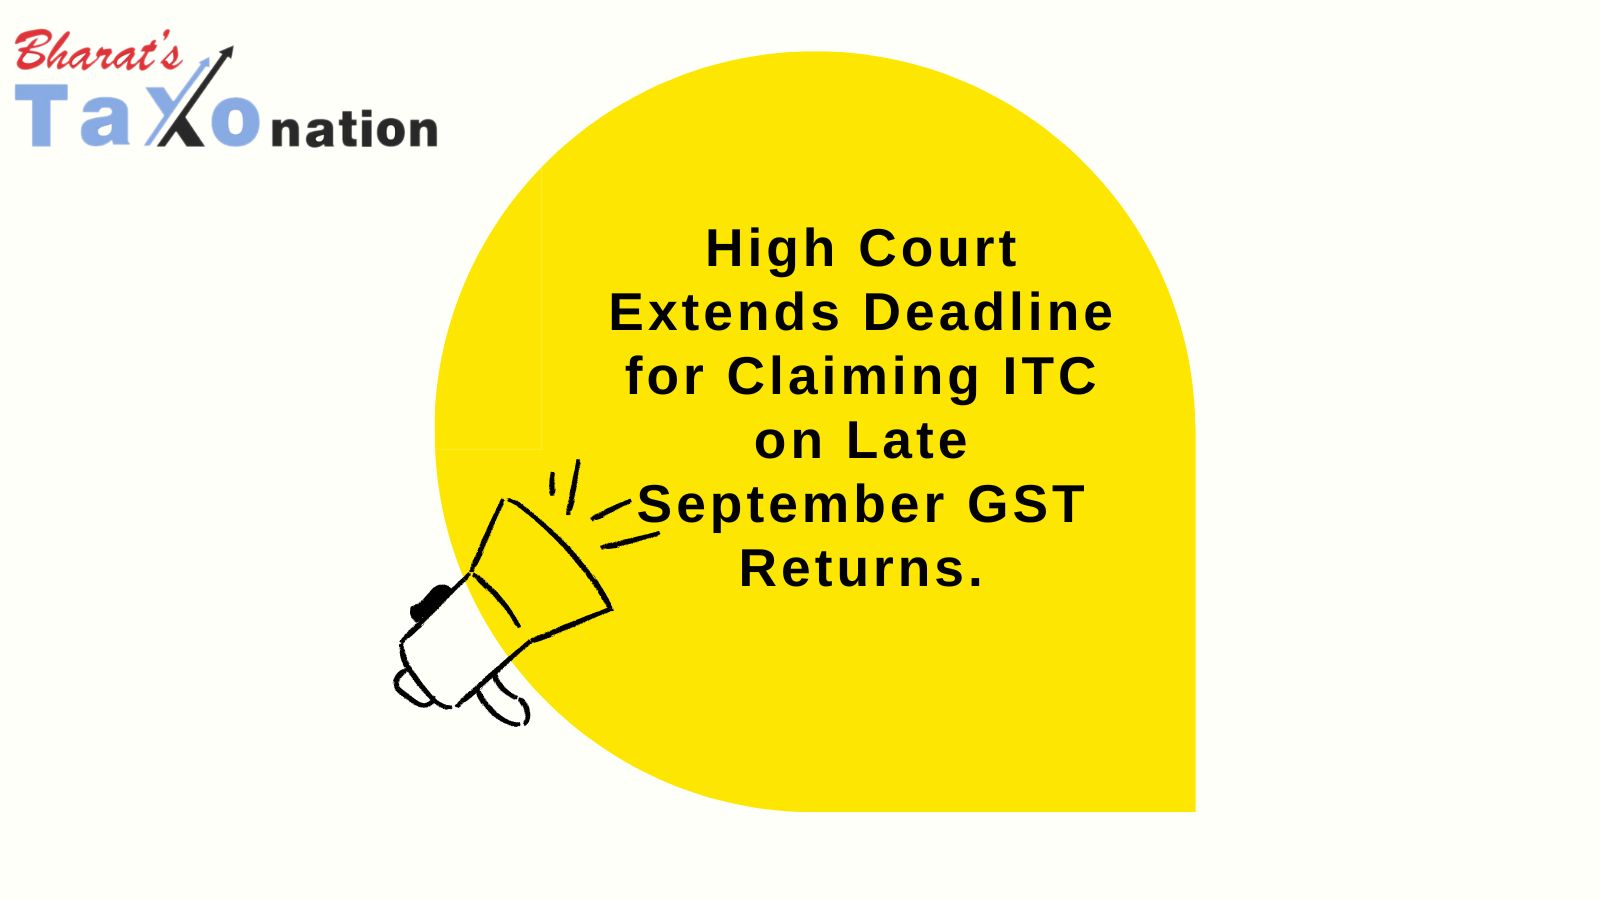 Business could claim the ITC even though their September tax return (GSTR-3B) was filed late. The new deadline for filing September returns is considered to be November 30th, applicable from July 1st, 2017. HC